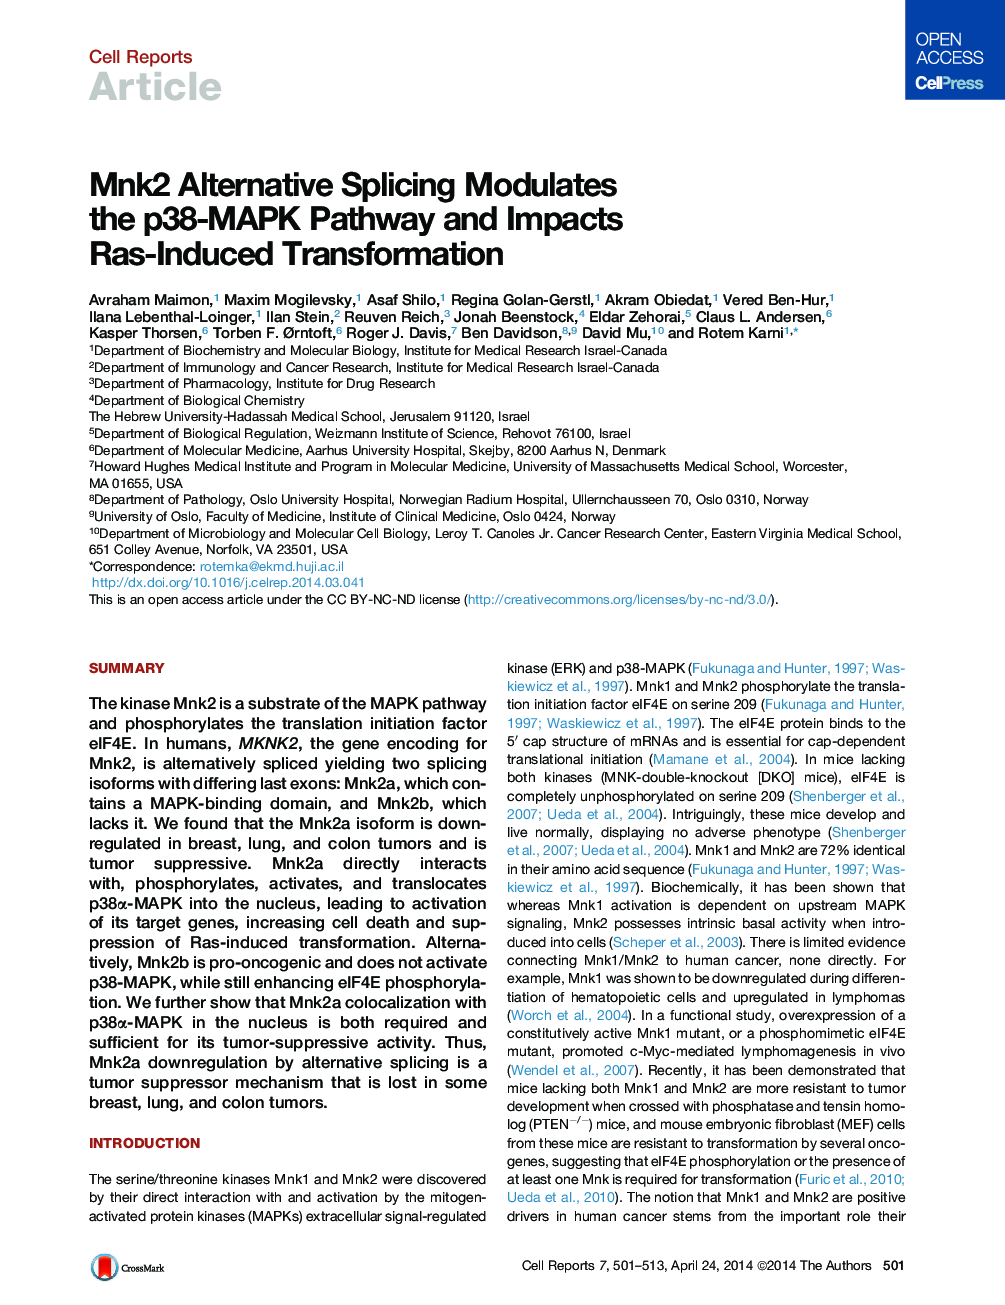 Mnk2 Alternative Splicing Modulates the p38-MAPK Pathway and Impacts Ras-Induced Transformation 